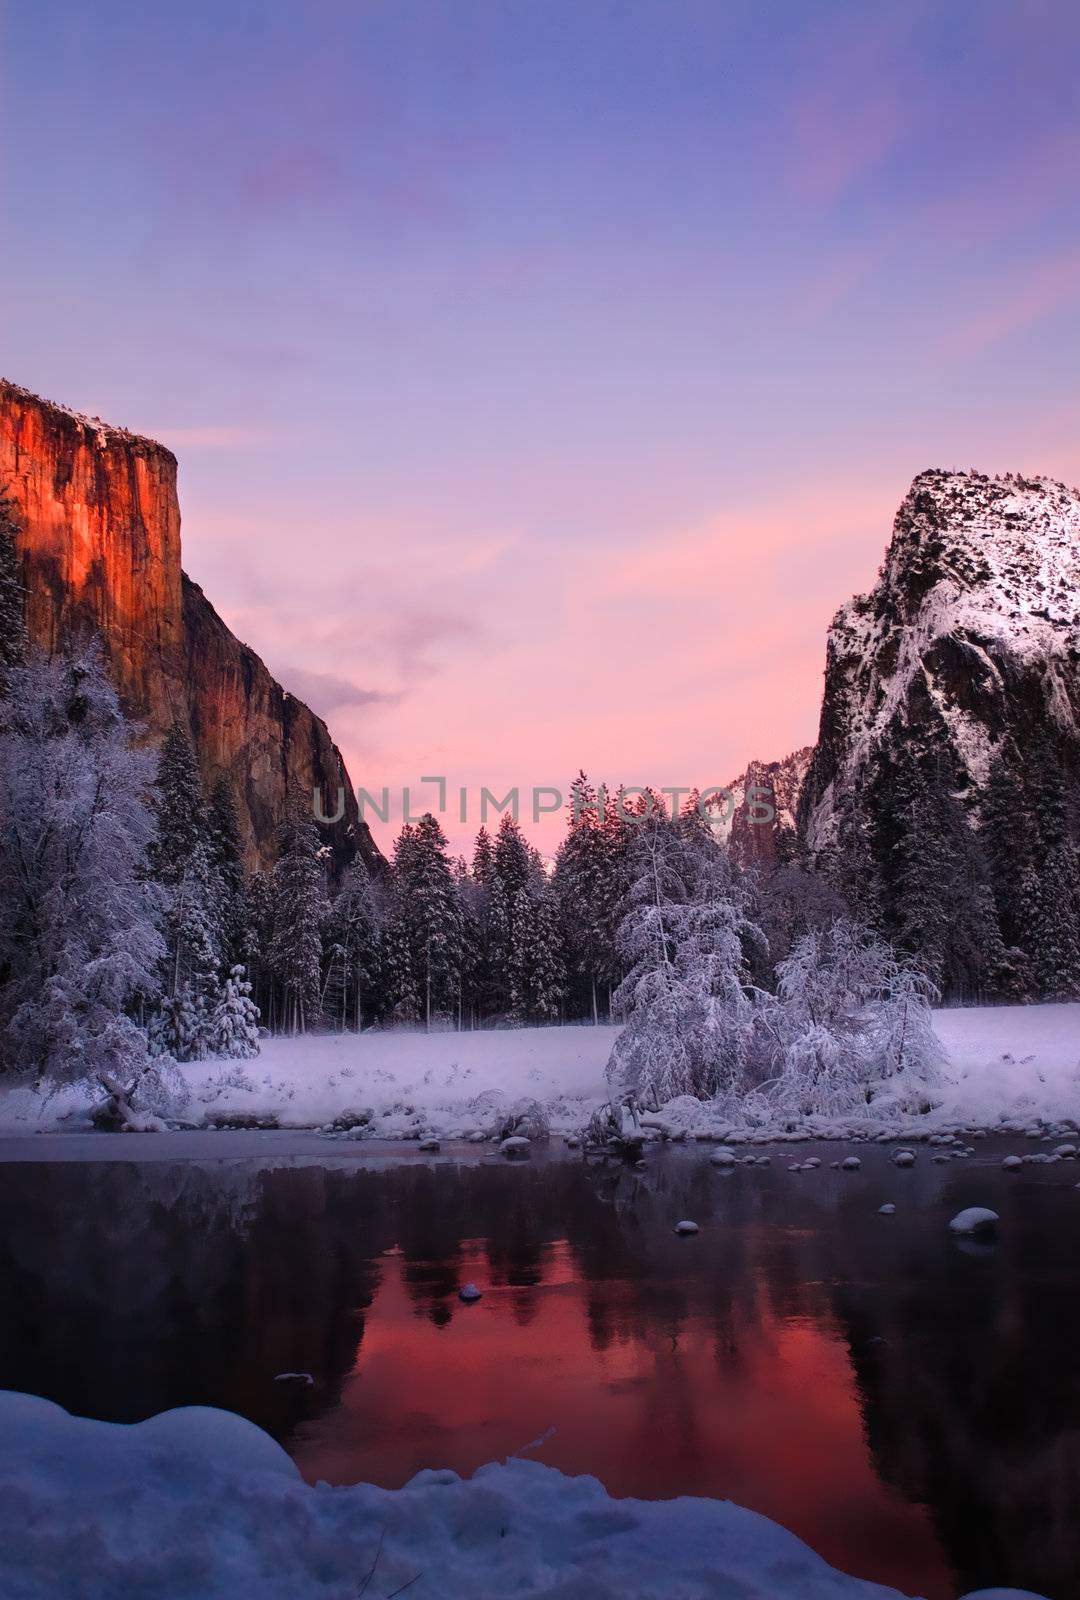 El Capitan and the Merced river at sunset in Yosemite valley, California during winter